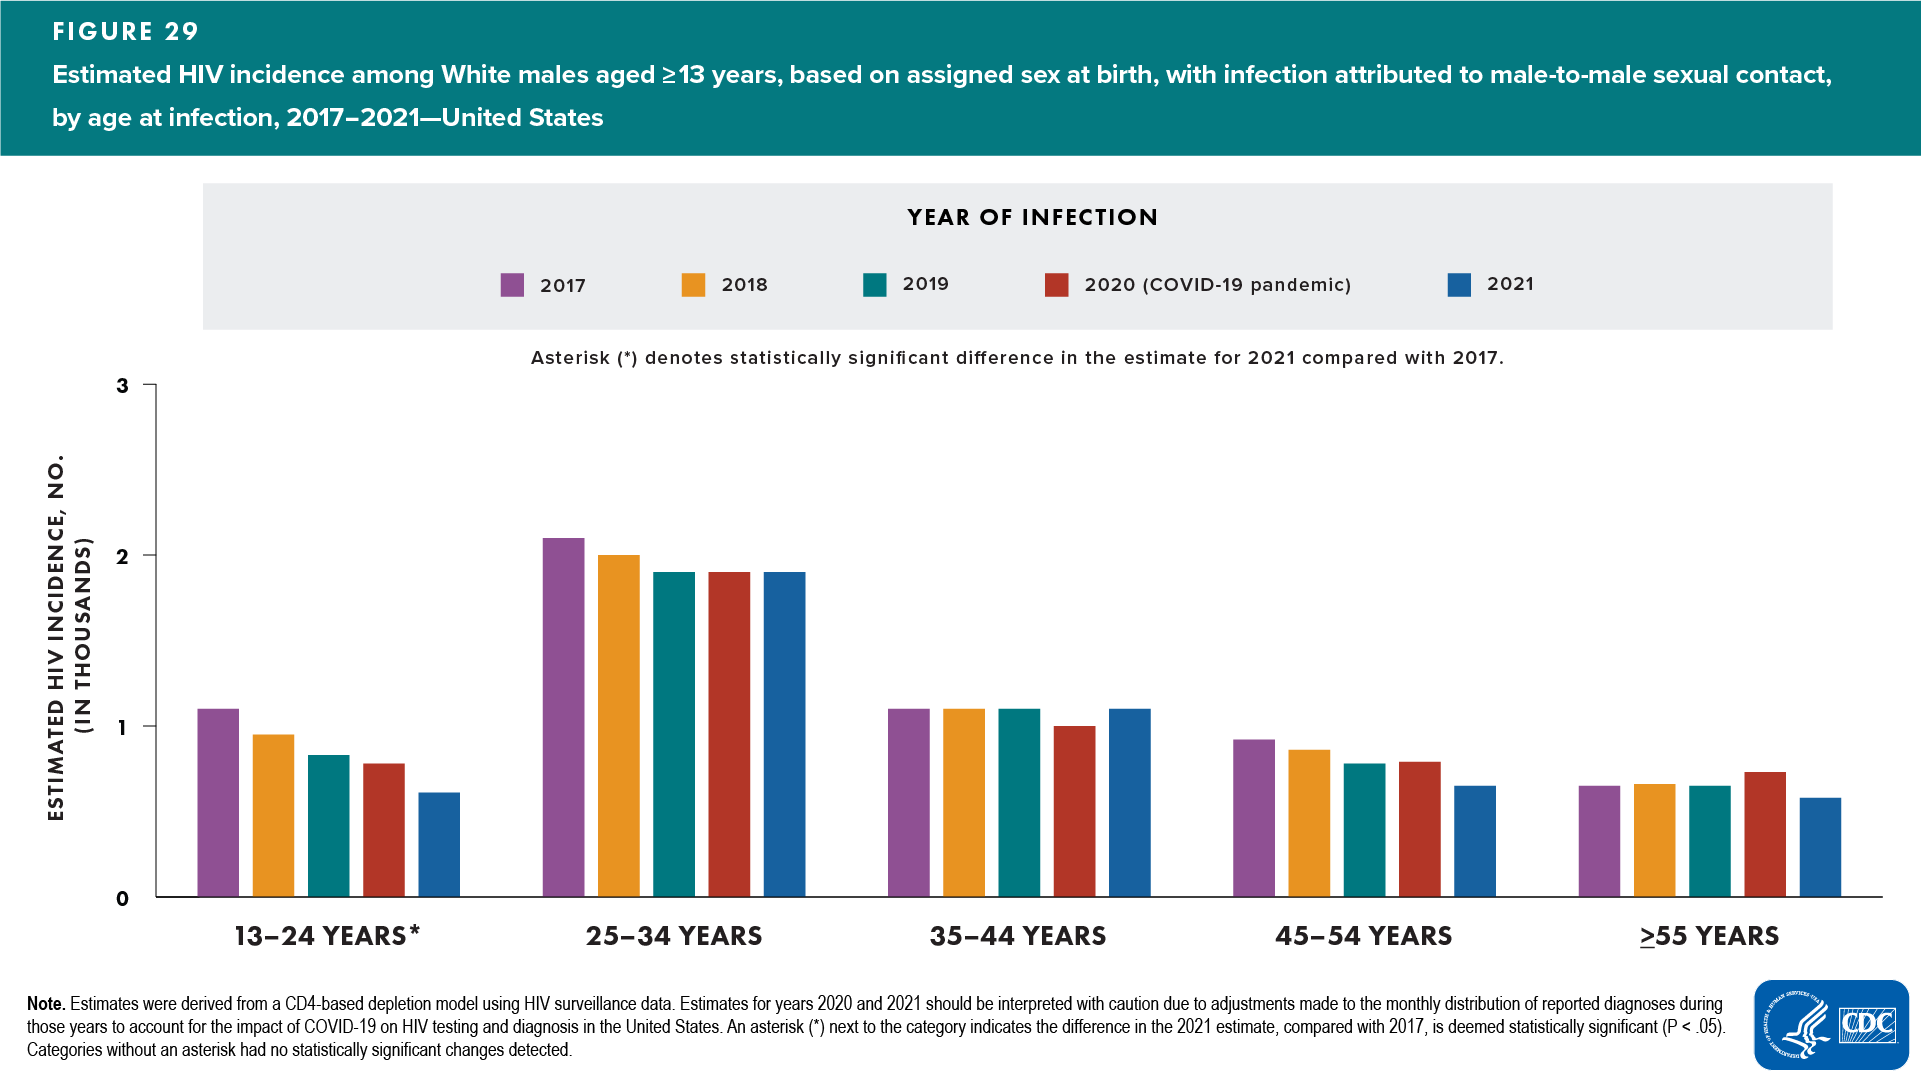 Figure 29. Estimated HIV incidence among White males aged ≥13 years, based on assigned sex at birth, with infection attributed to male-to-male sexual contact, 2017–2021—United States